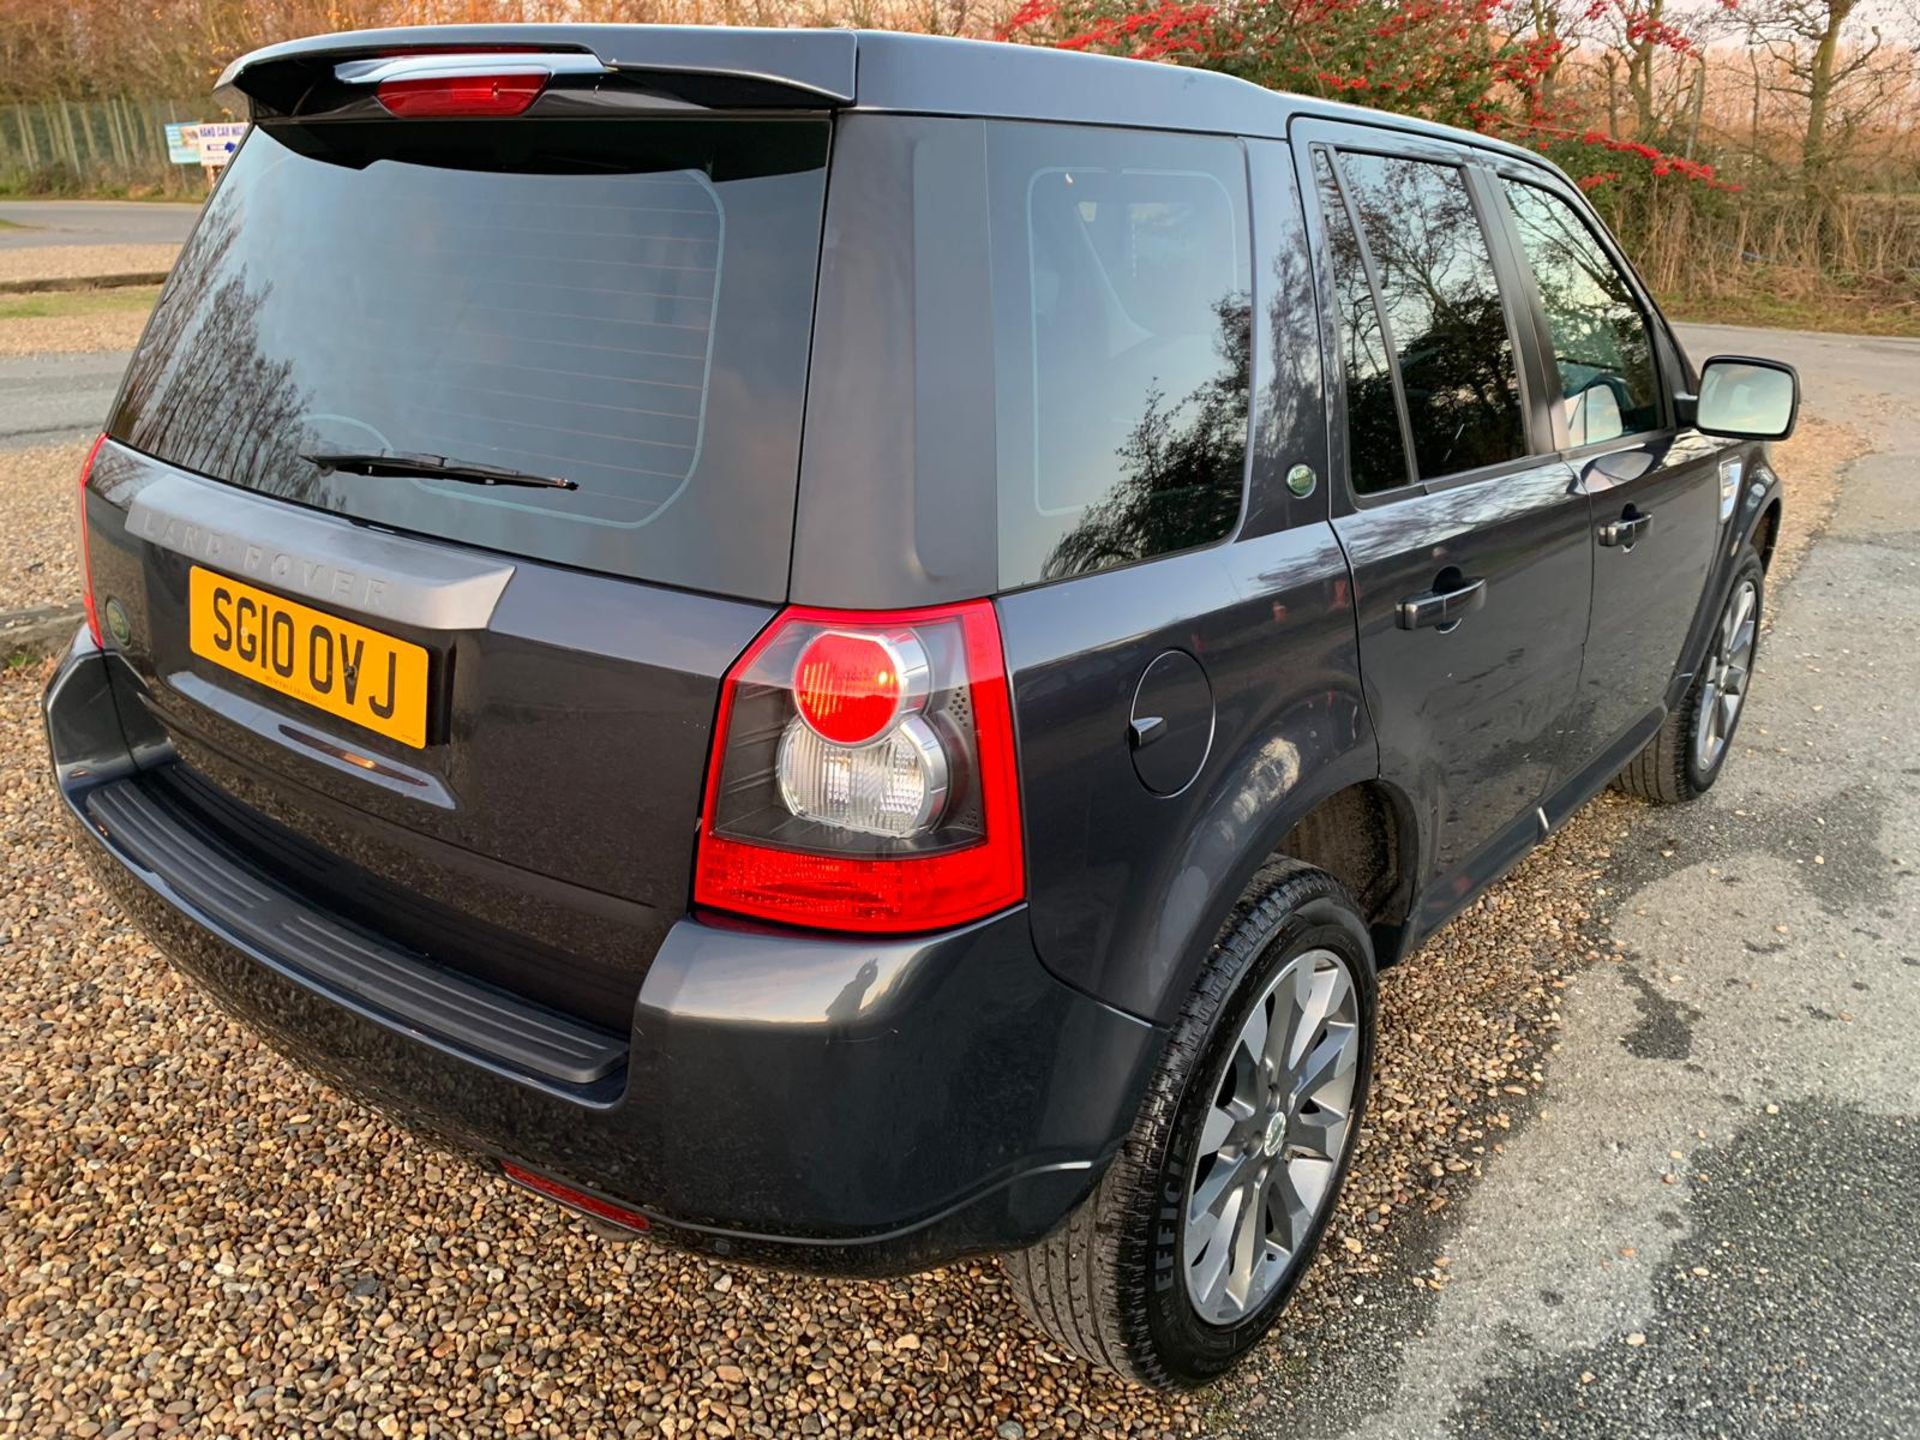 2010/10 REG LAND ROVER FREELANDER SPORT LE TD4 2.2 DIESEL AUTO 4X4, SHOWING 2 FORMER KEEPERS - Image 6 of 13